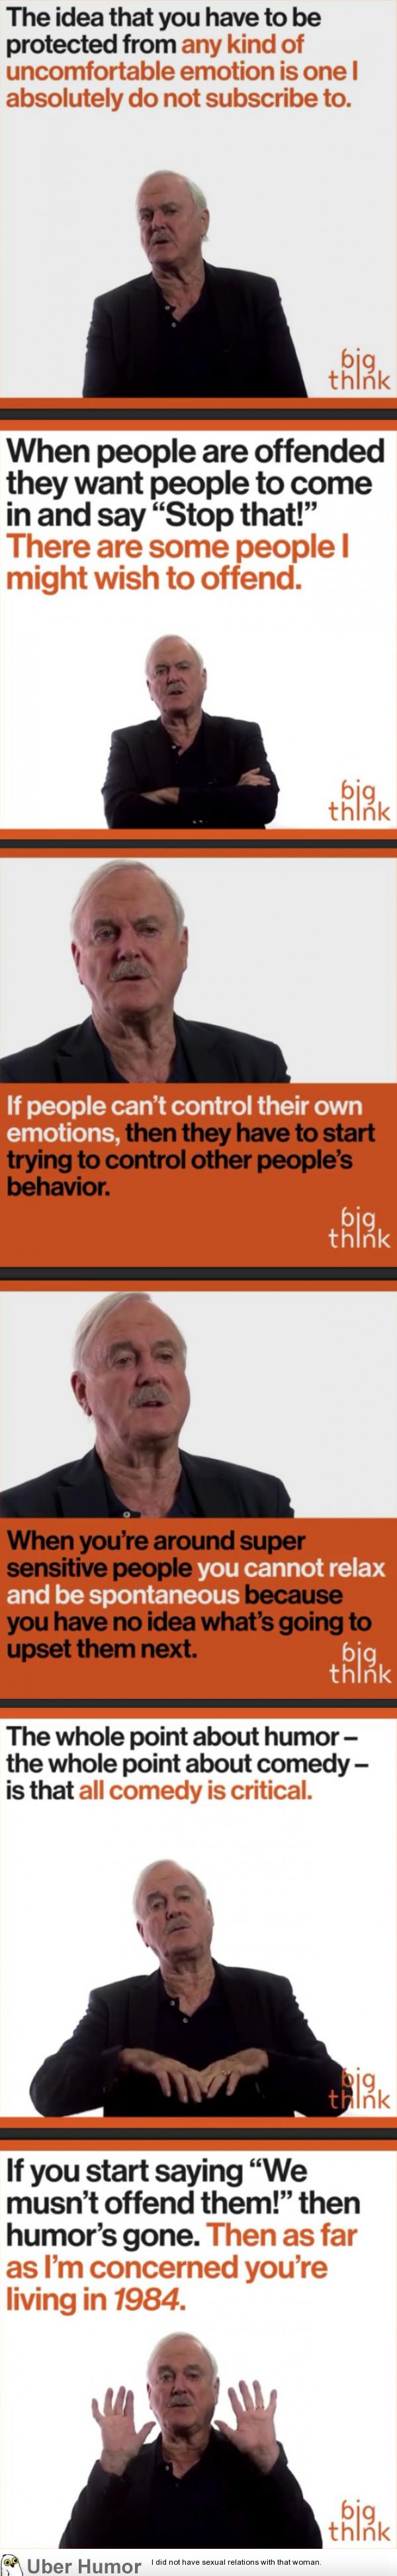 Offending people: John Cleese dump | Funny Pictures, Quotes, Pics, Photos,  Images. Videos of Really Very Cute animals.